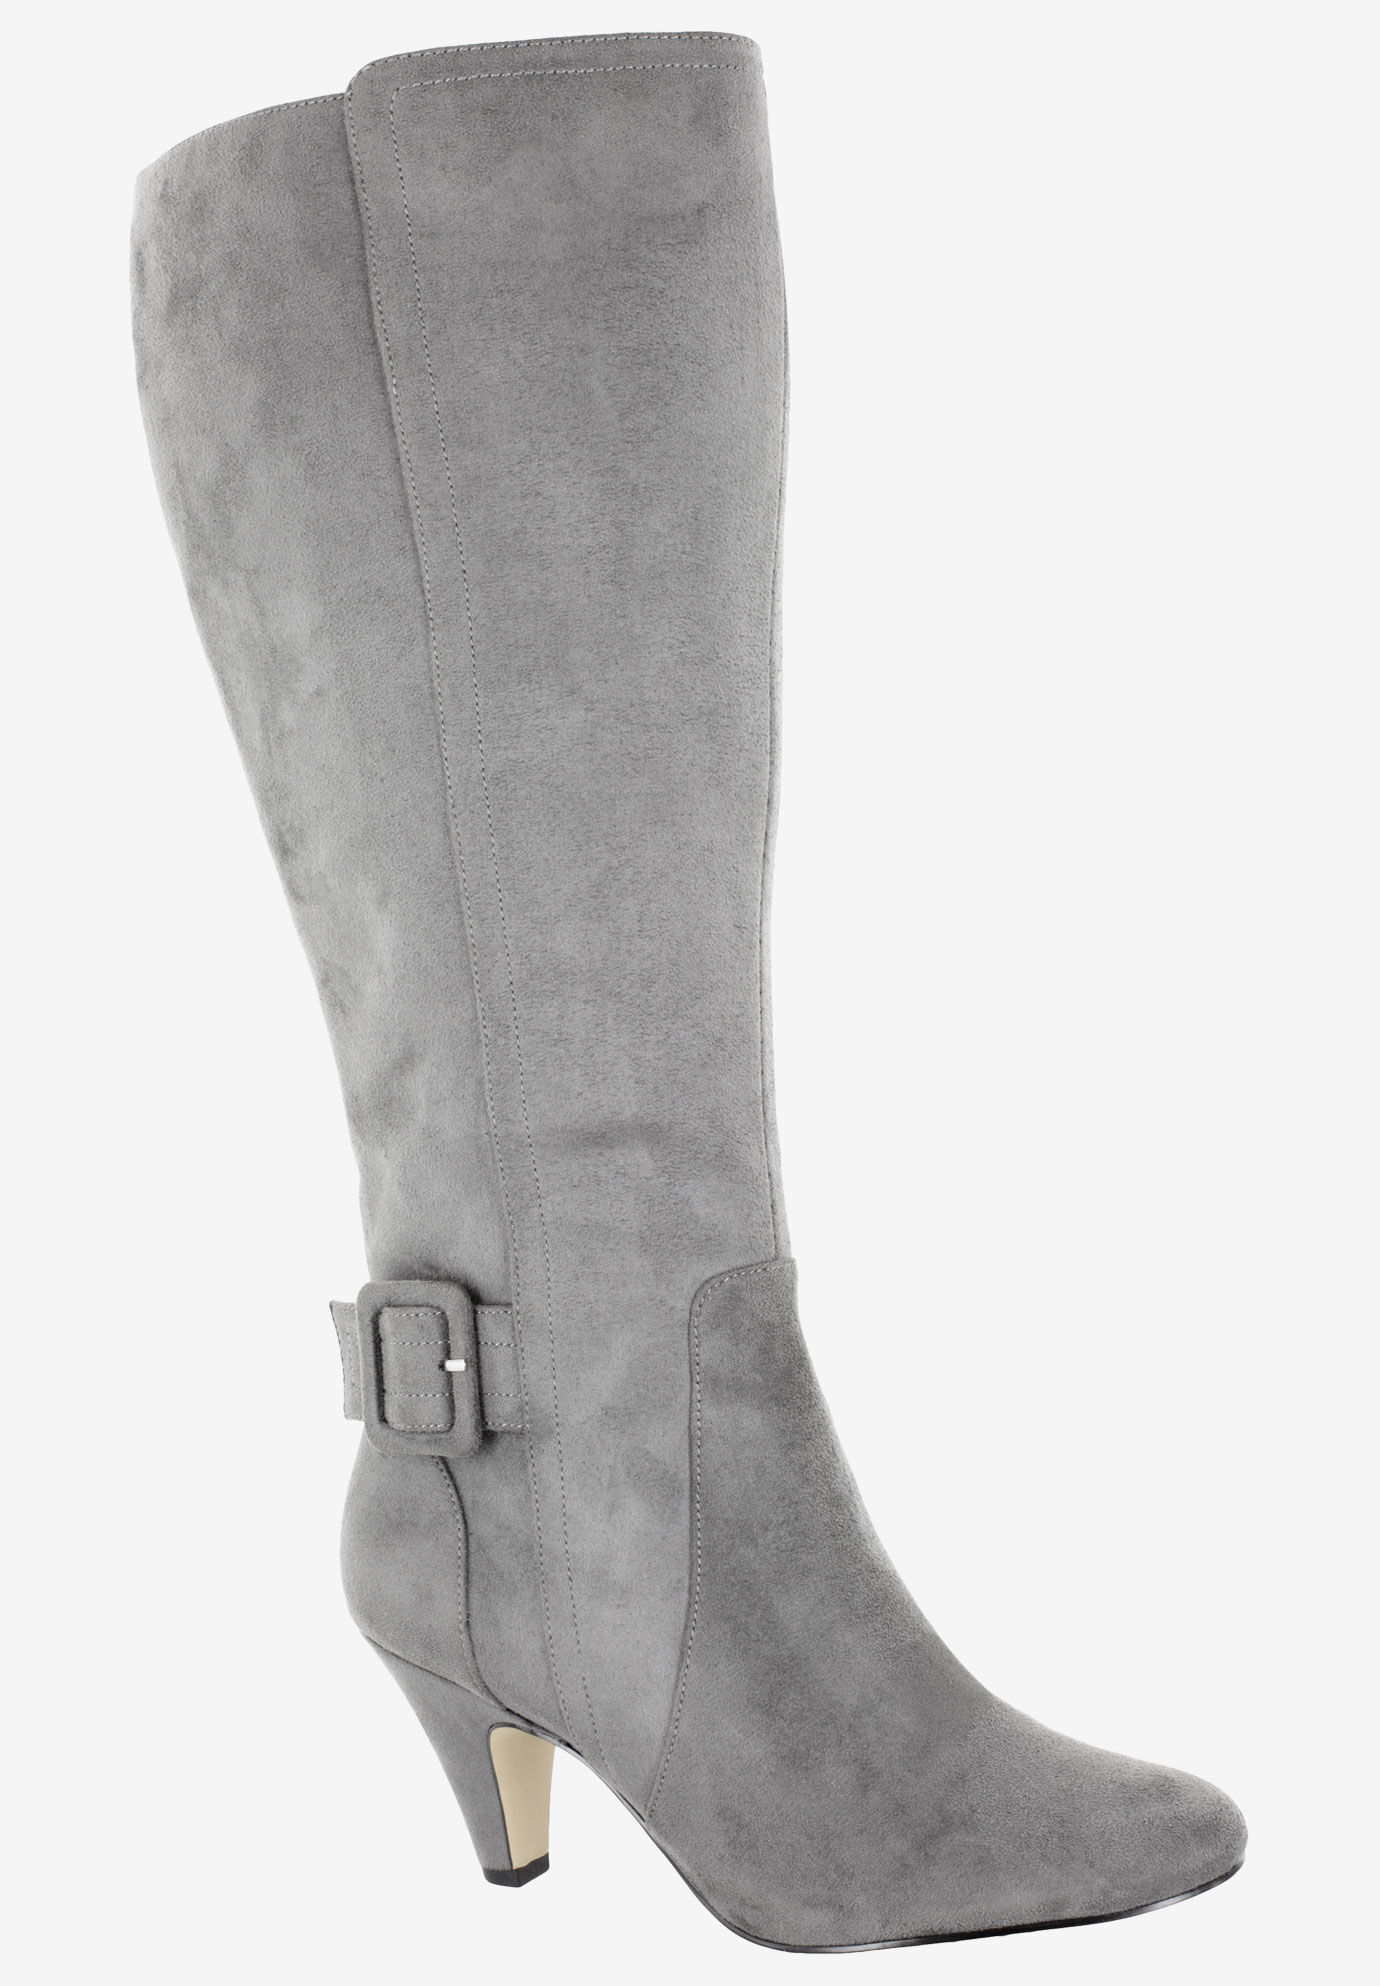 plus size knee high boots wide calf